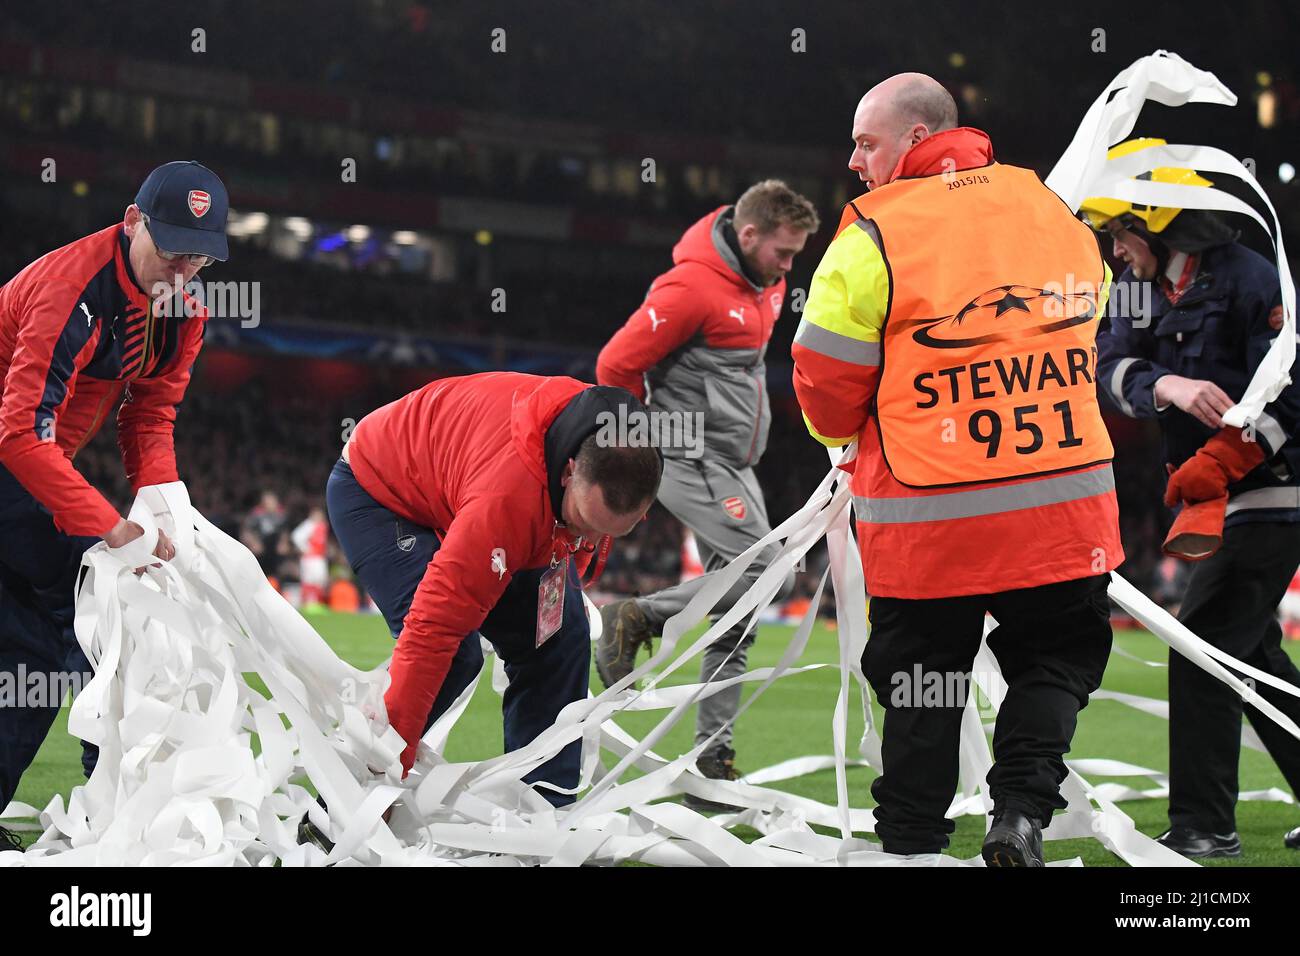 LONDON, ENGLAND - MARCH 7, 2017: Stewards clean the pitch after Bayern ultras thrown paper rolls during the second leg of the UEFA Champions League Round of 16 game between Arsenal FC and Bayern Munchen at Emirates Stadium. Copyright: Cosmin Iftode/Picstaff Stock Photo